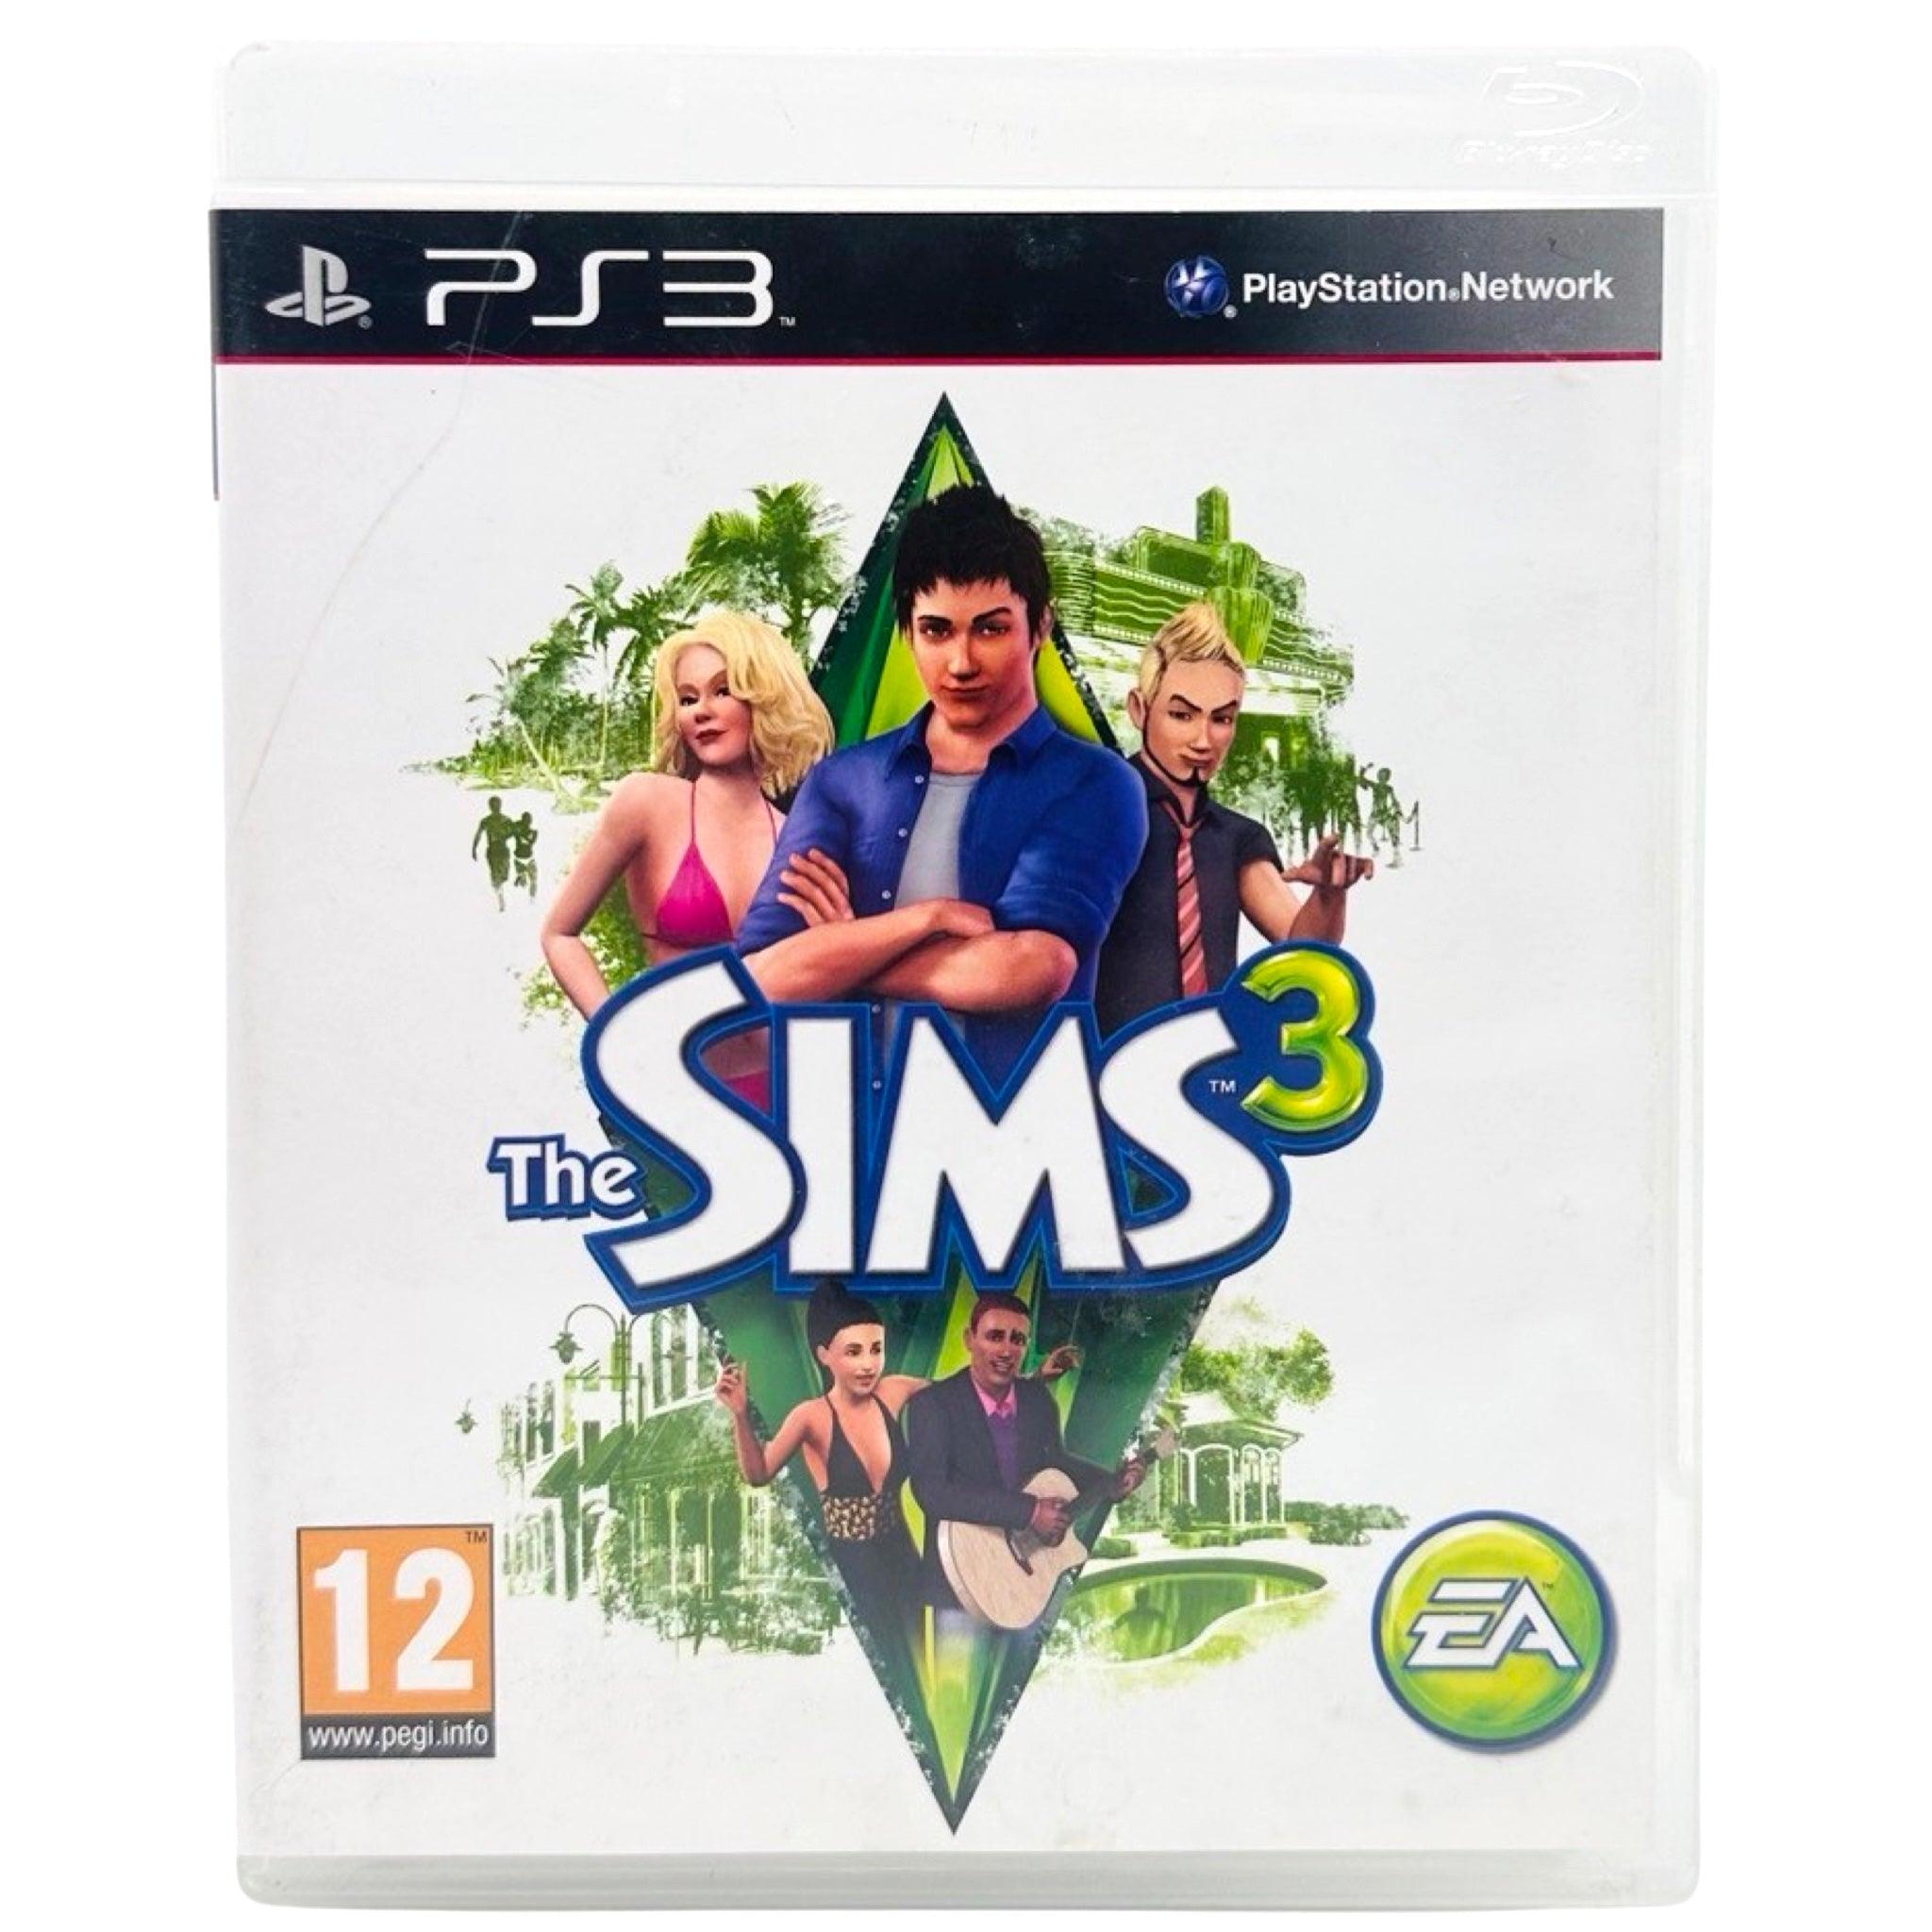 PS3: The Sims 3 - RetroGaming.no